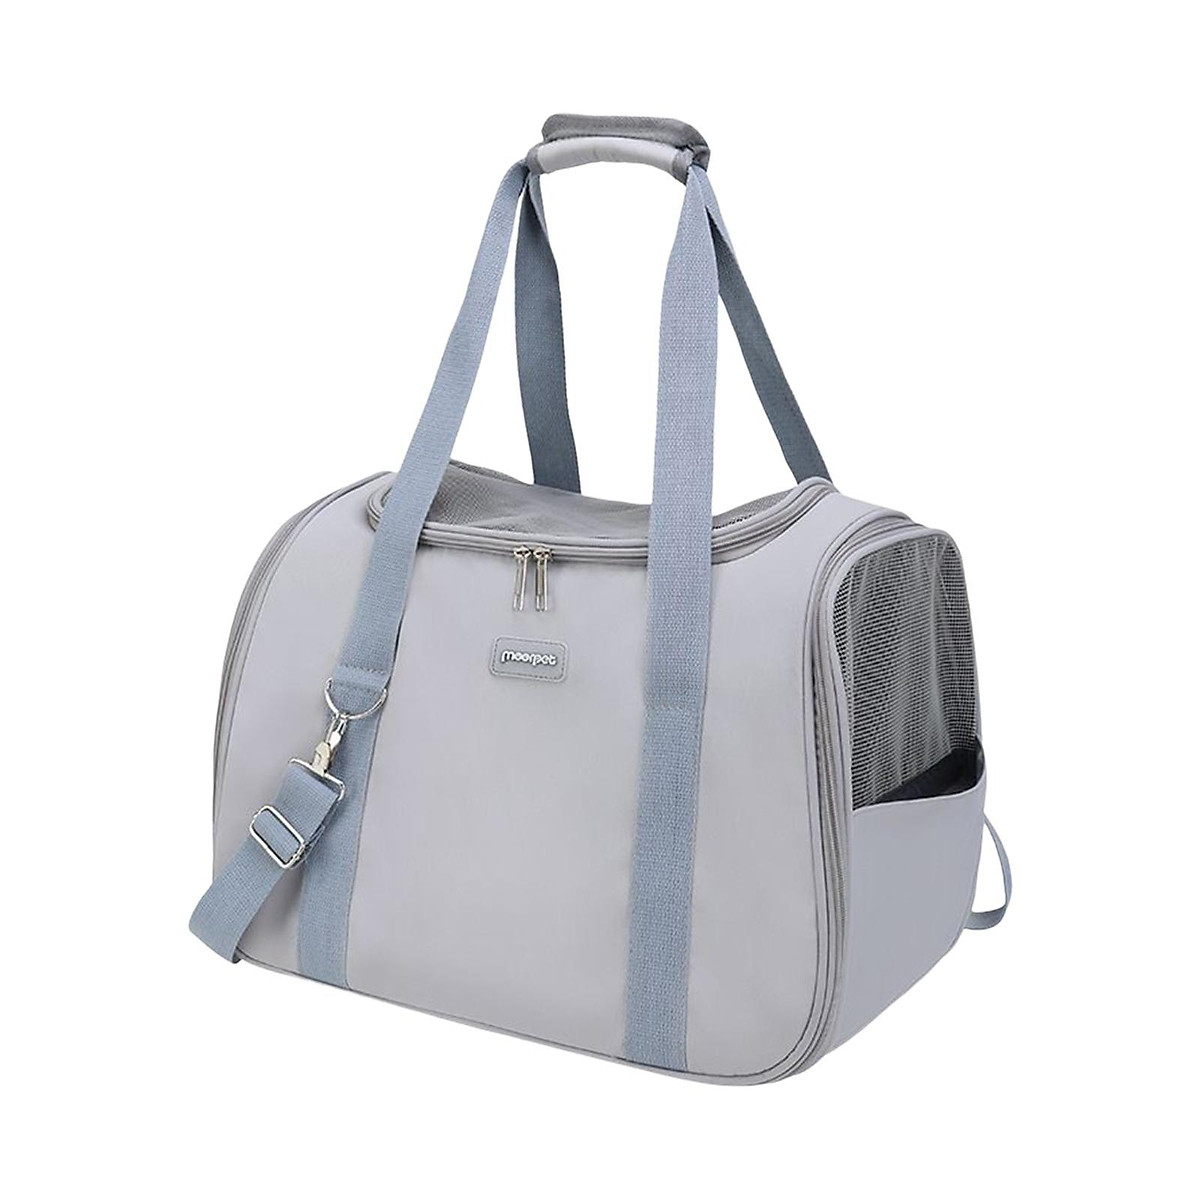 ✓Canvas Pet Carrier - Travel Bag with Leather Handles for Dog and Cats✓ |  eBay